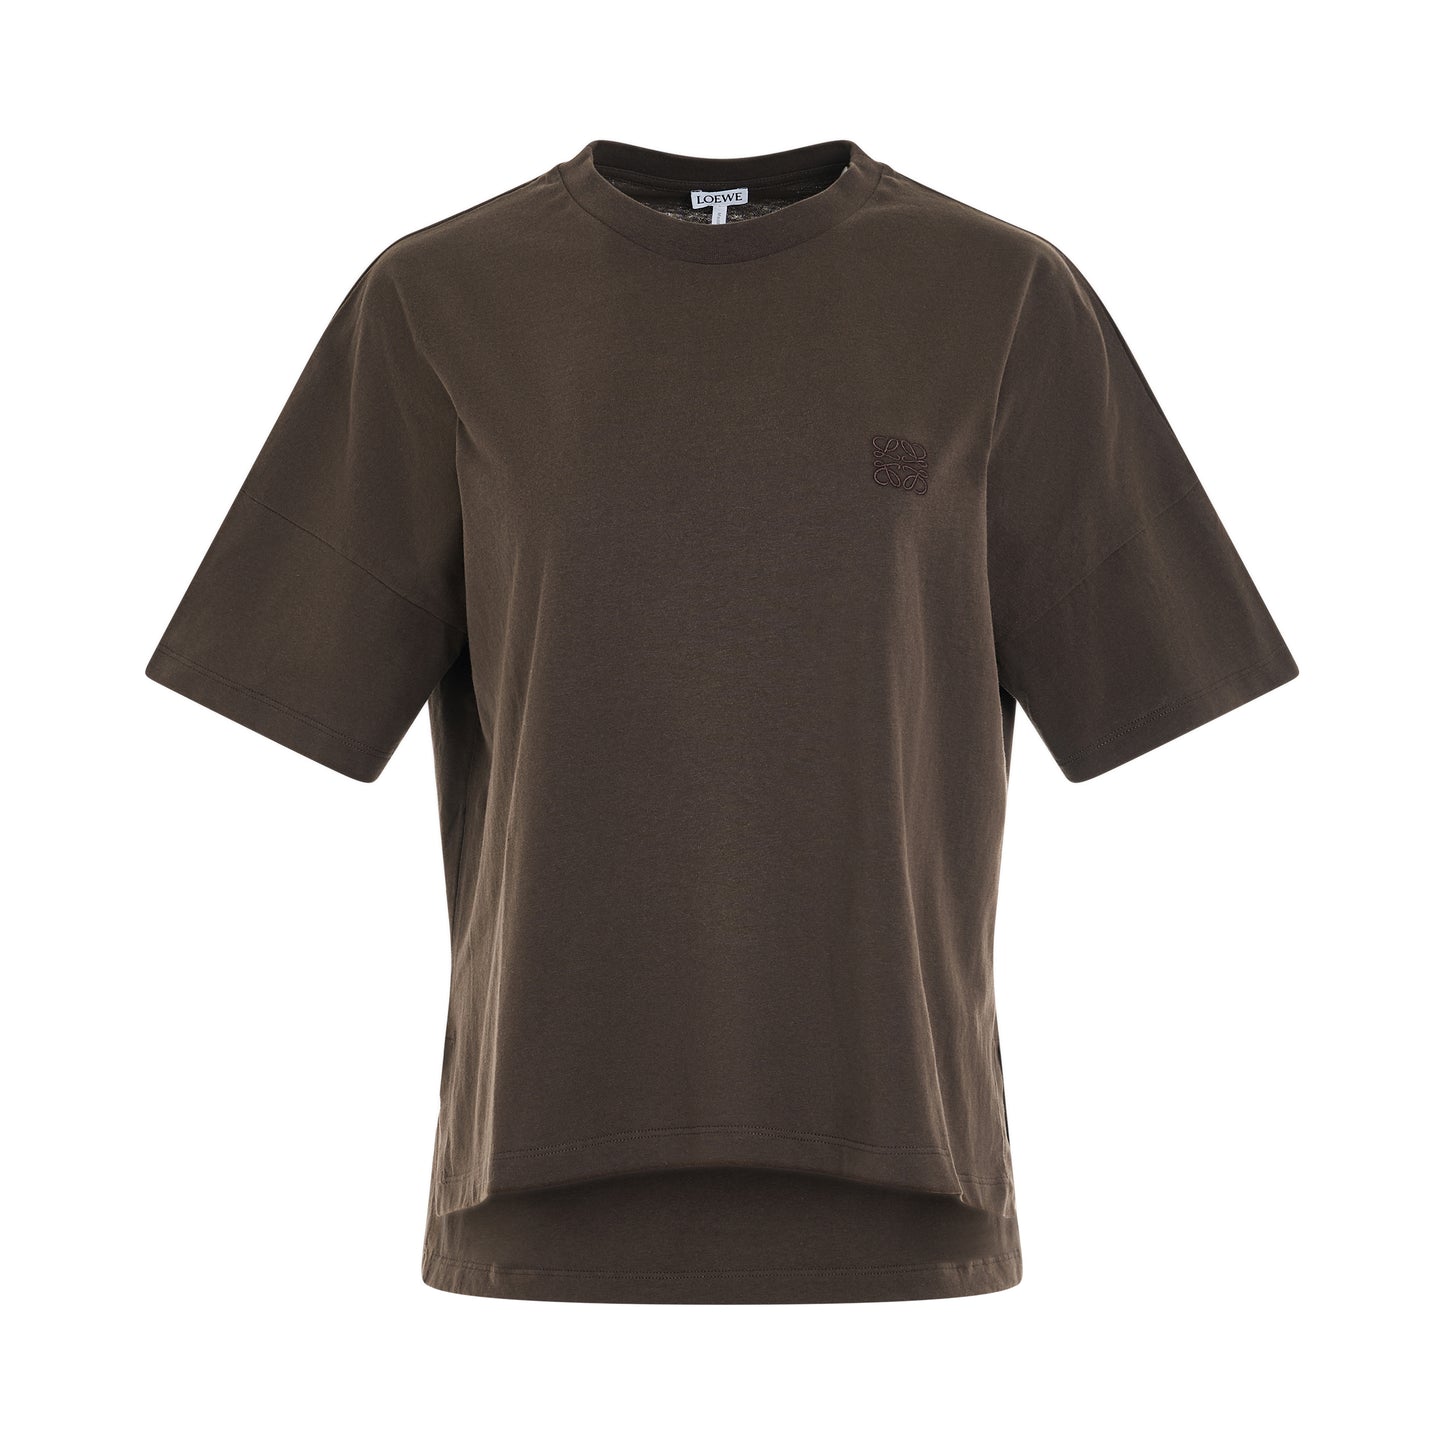 Anagram Boxy Fit T-Shirt in Dark Taupe